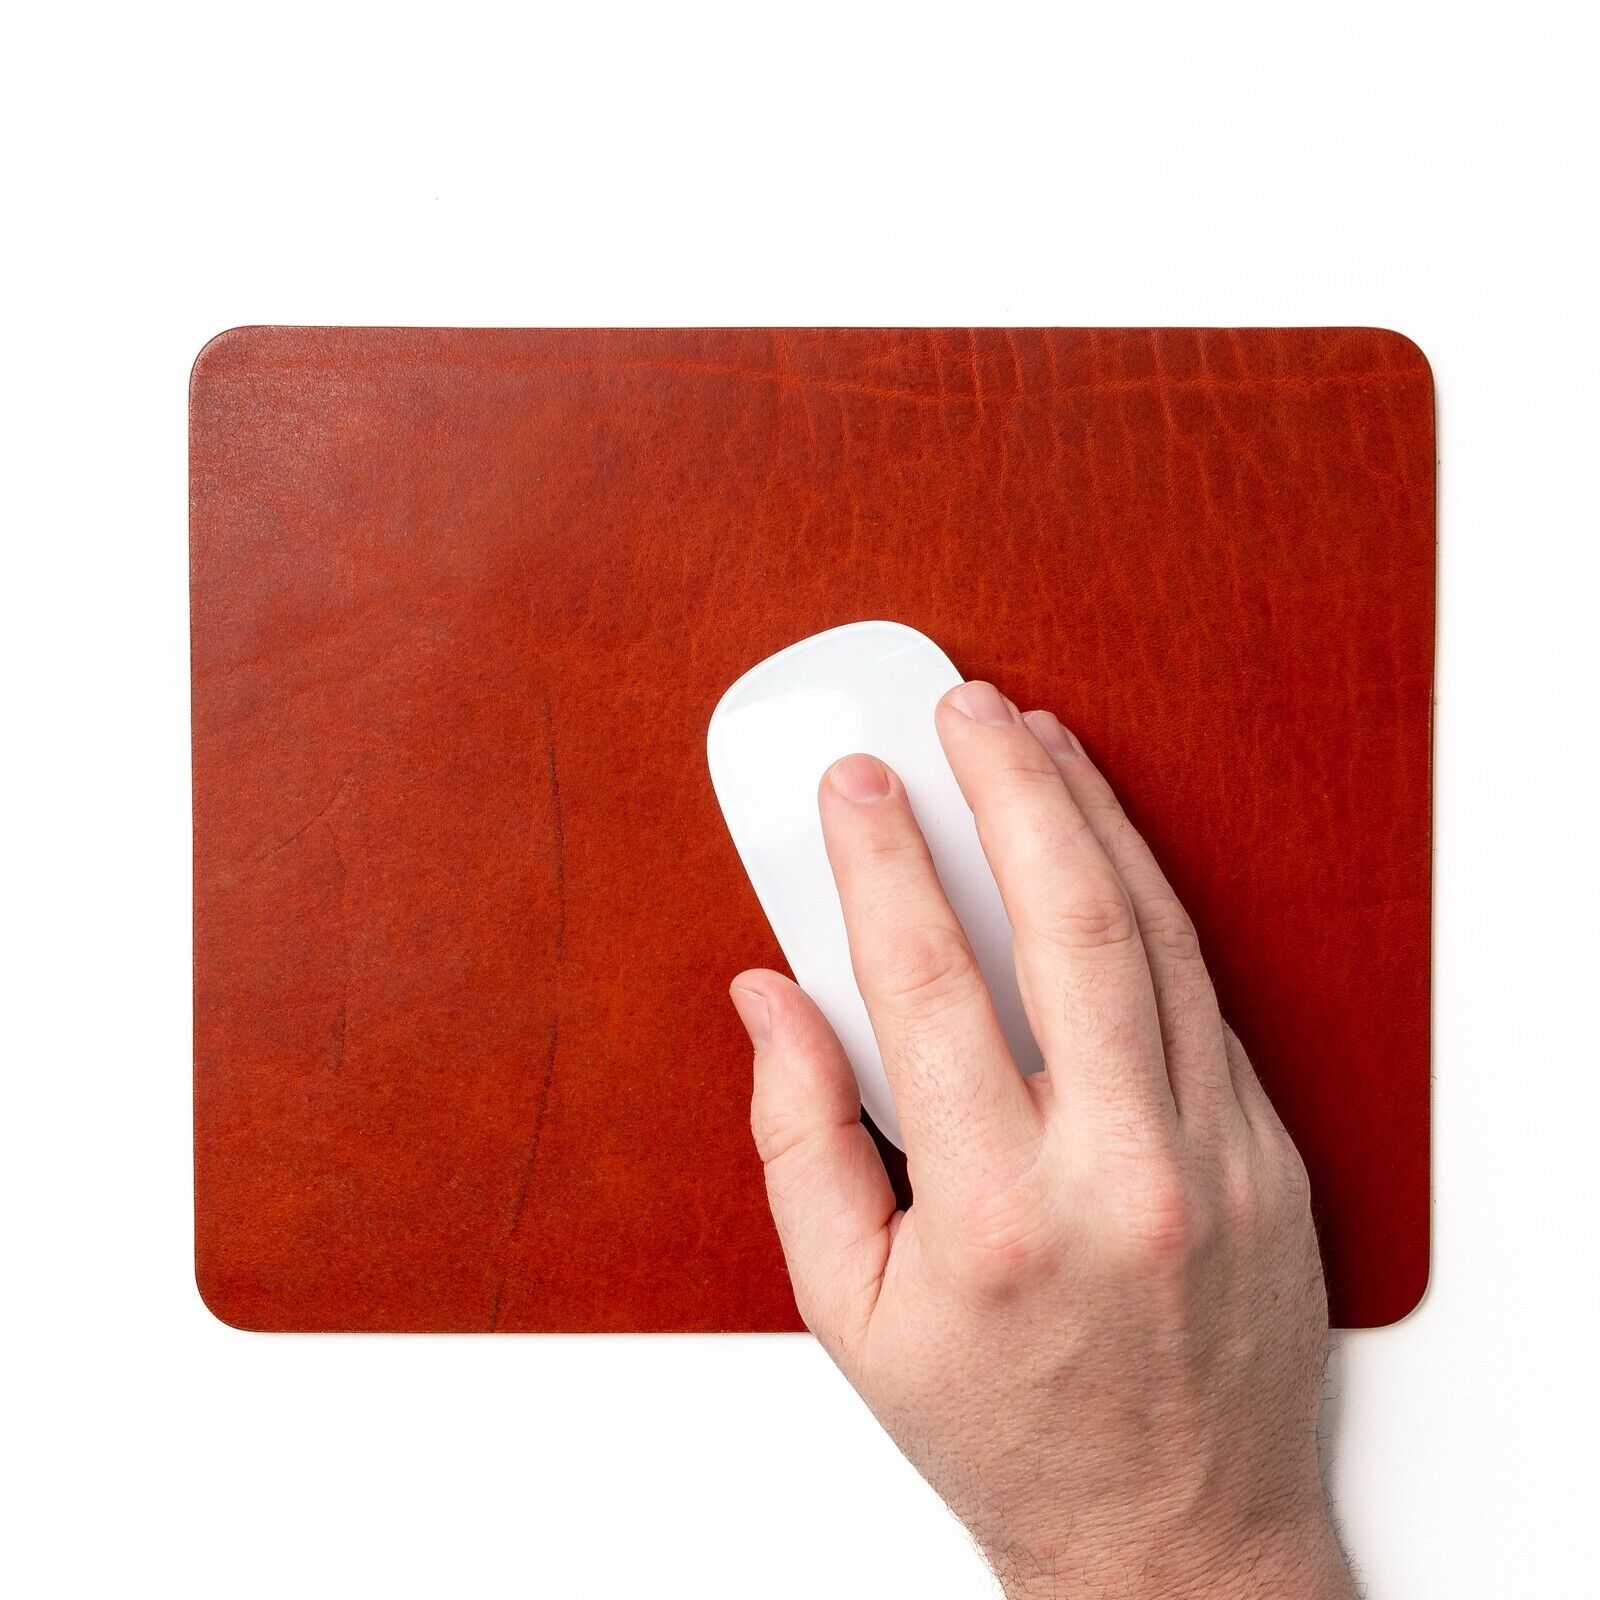 Premium Full Grain Leather Mouse Pad in Tan - Genuine Real Cowhide Leather